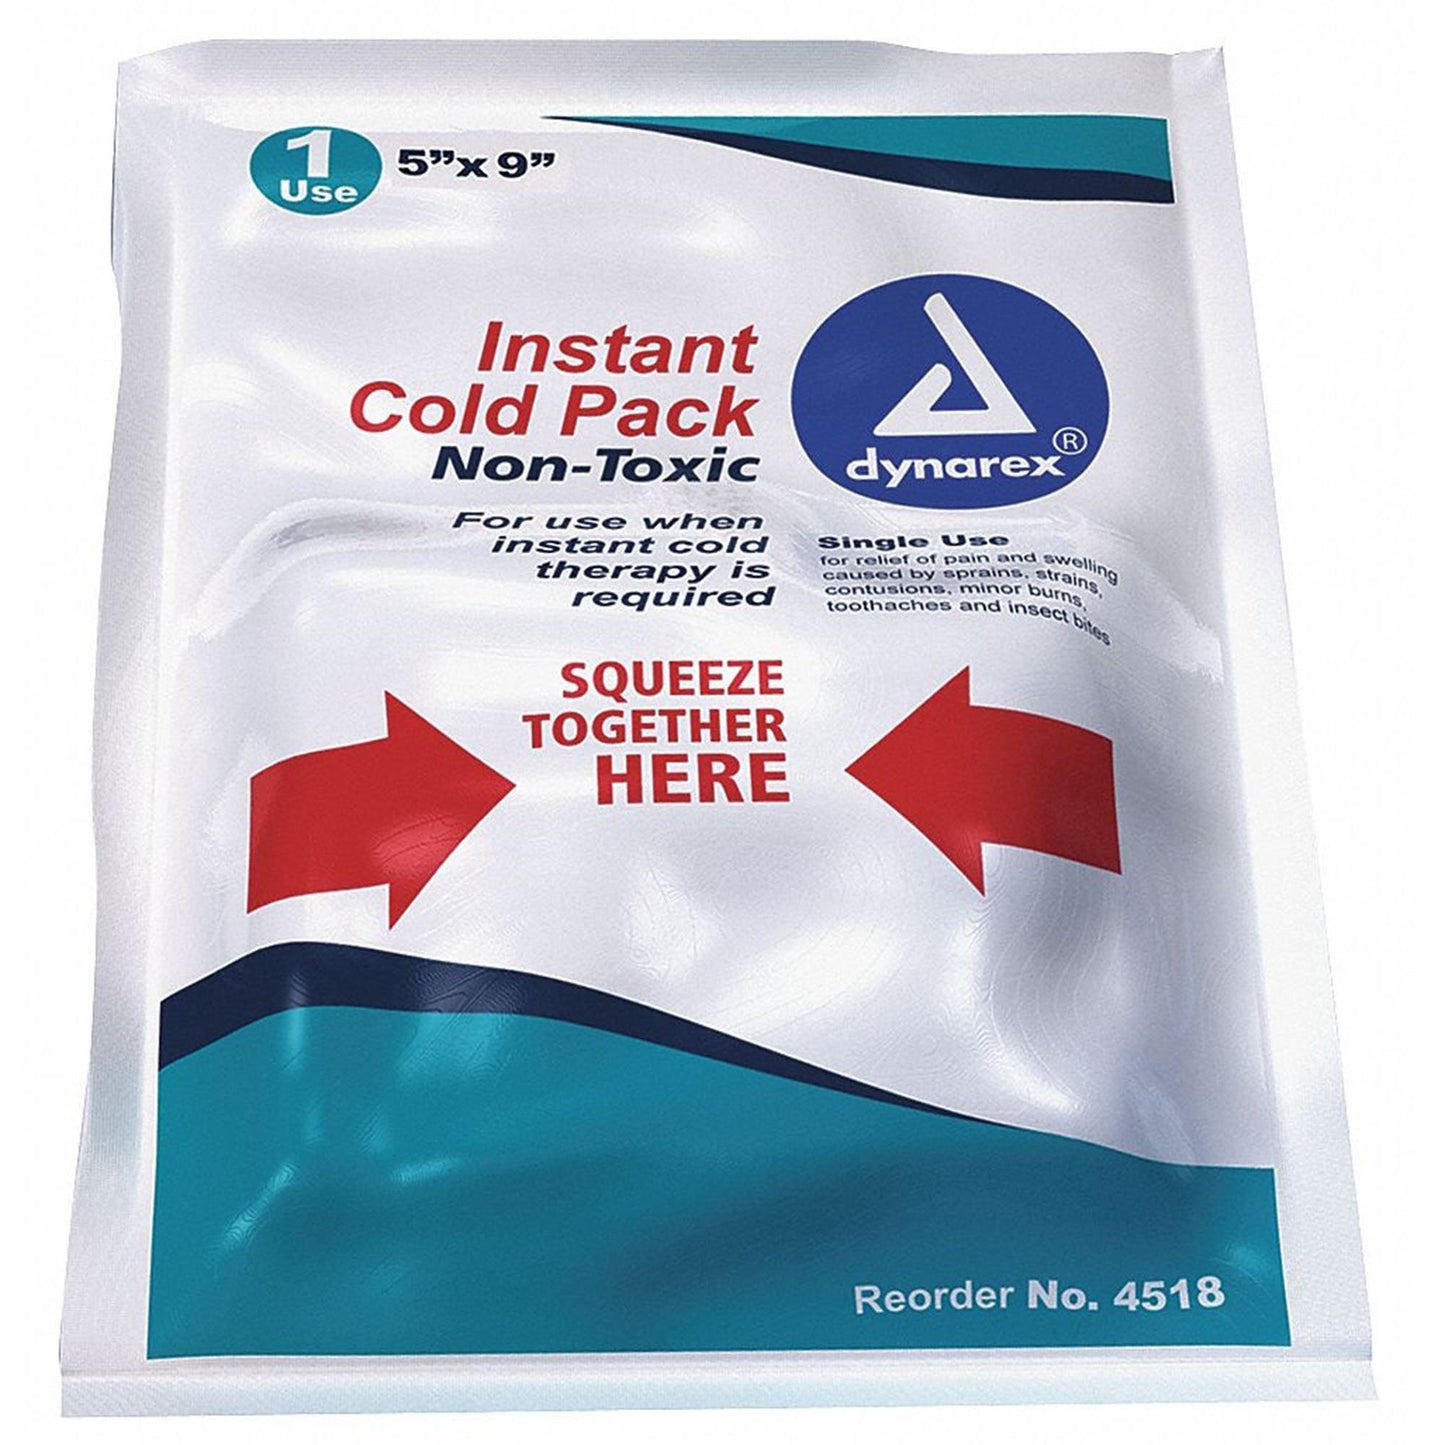 Dynarex® Instant Cold Pack, 5 x 9 Inch, Non-toxic, 24 ct.